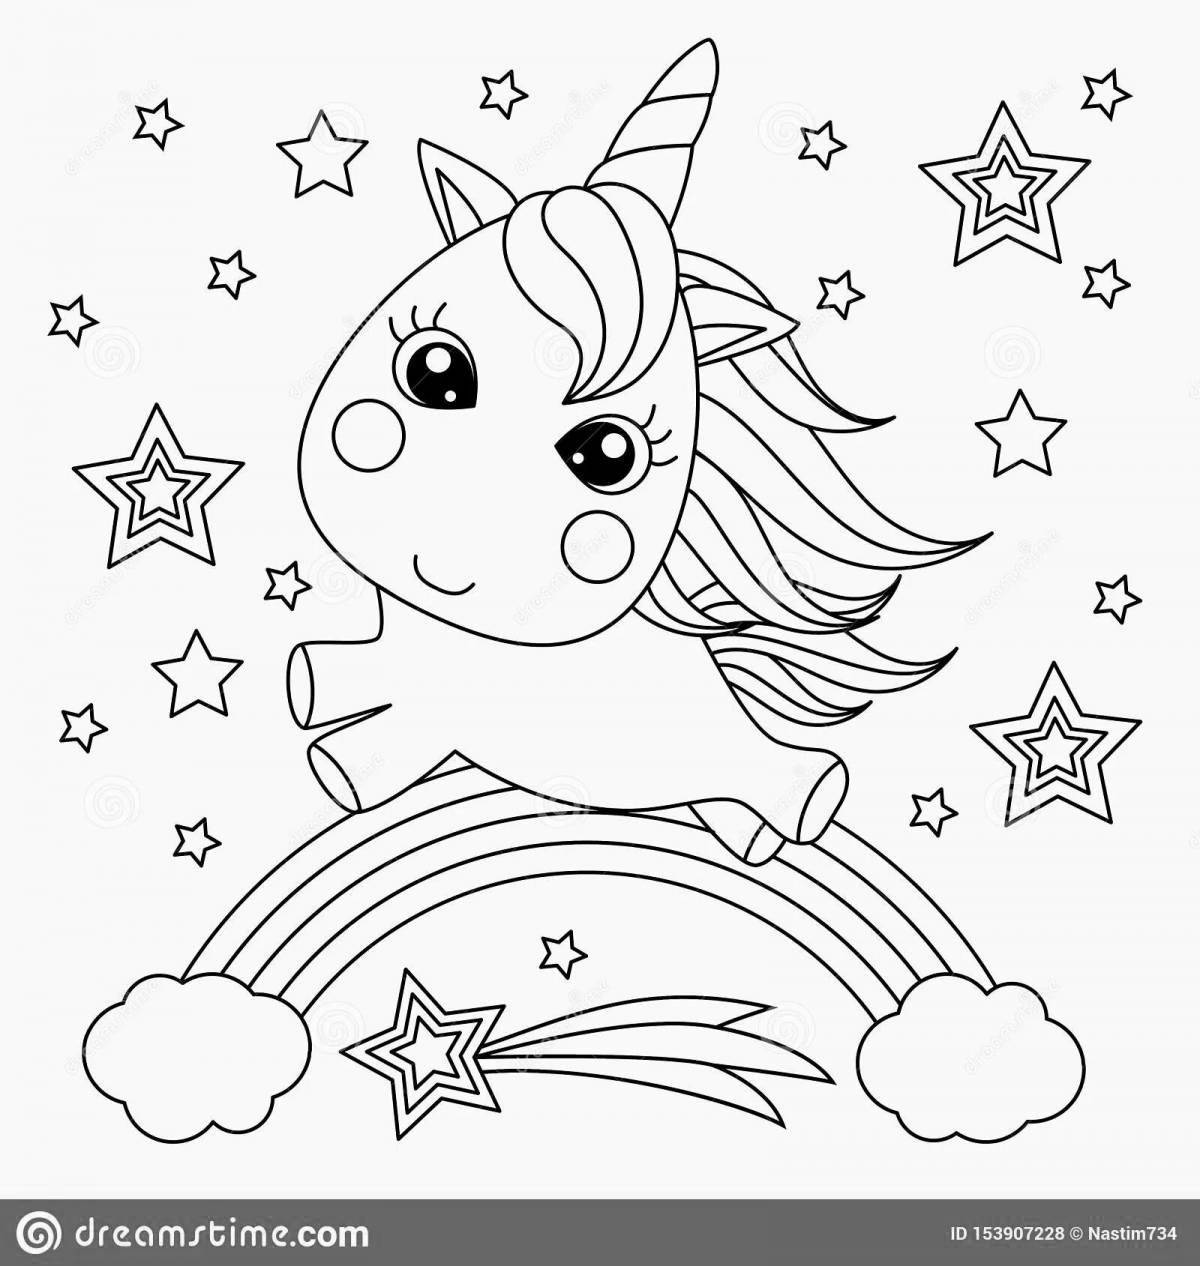 Coloring page magical rainbow kitten